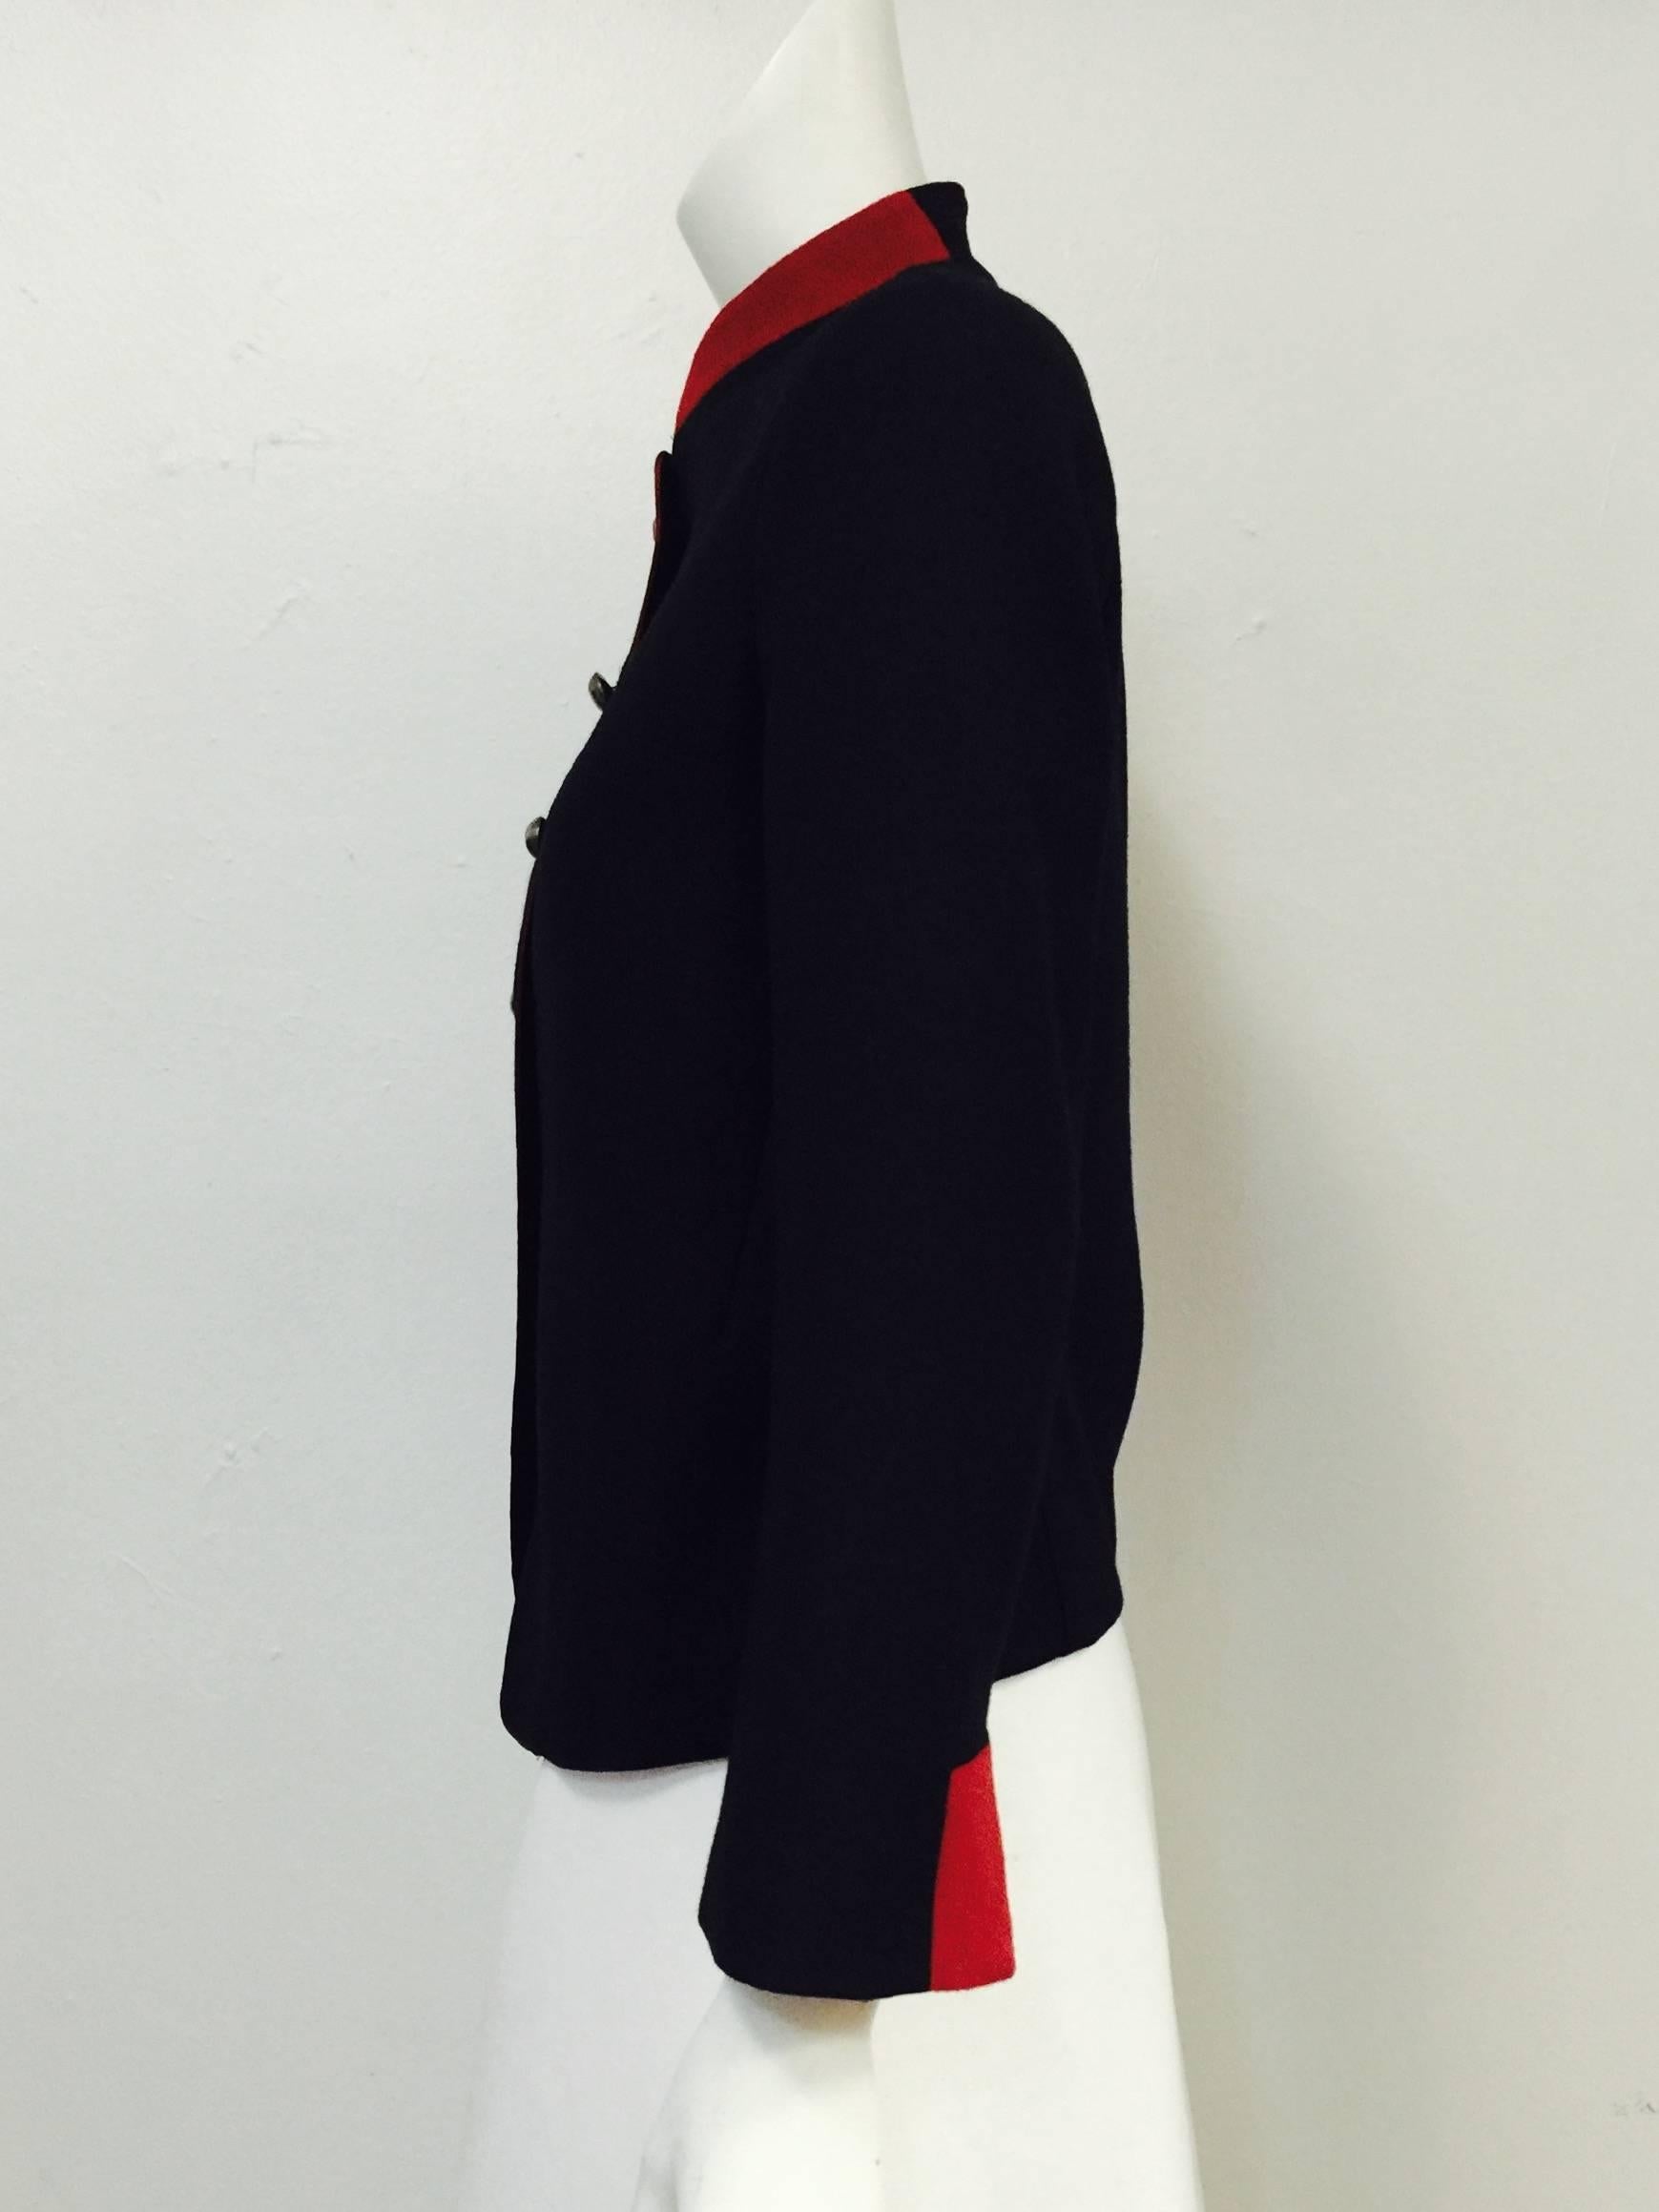 Nili Lotan Jacket Black Jacket pays homage to the military!  Features, luxurious wool and cashmere blend fabric, contrasting red Nehru collar, piping, and sleeve cuff accents and hammered silver tone buttons.  Fully lined.  Sleeve lining crafted